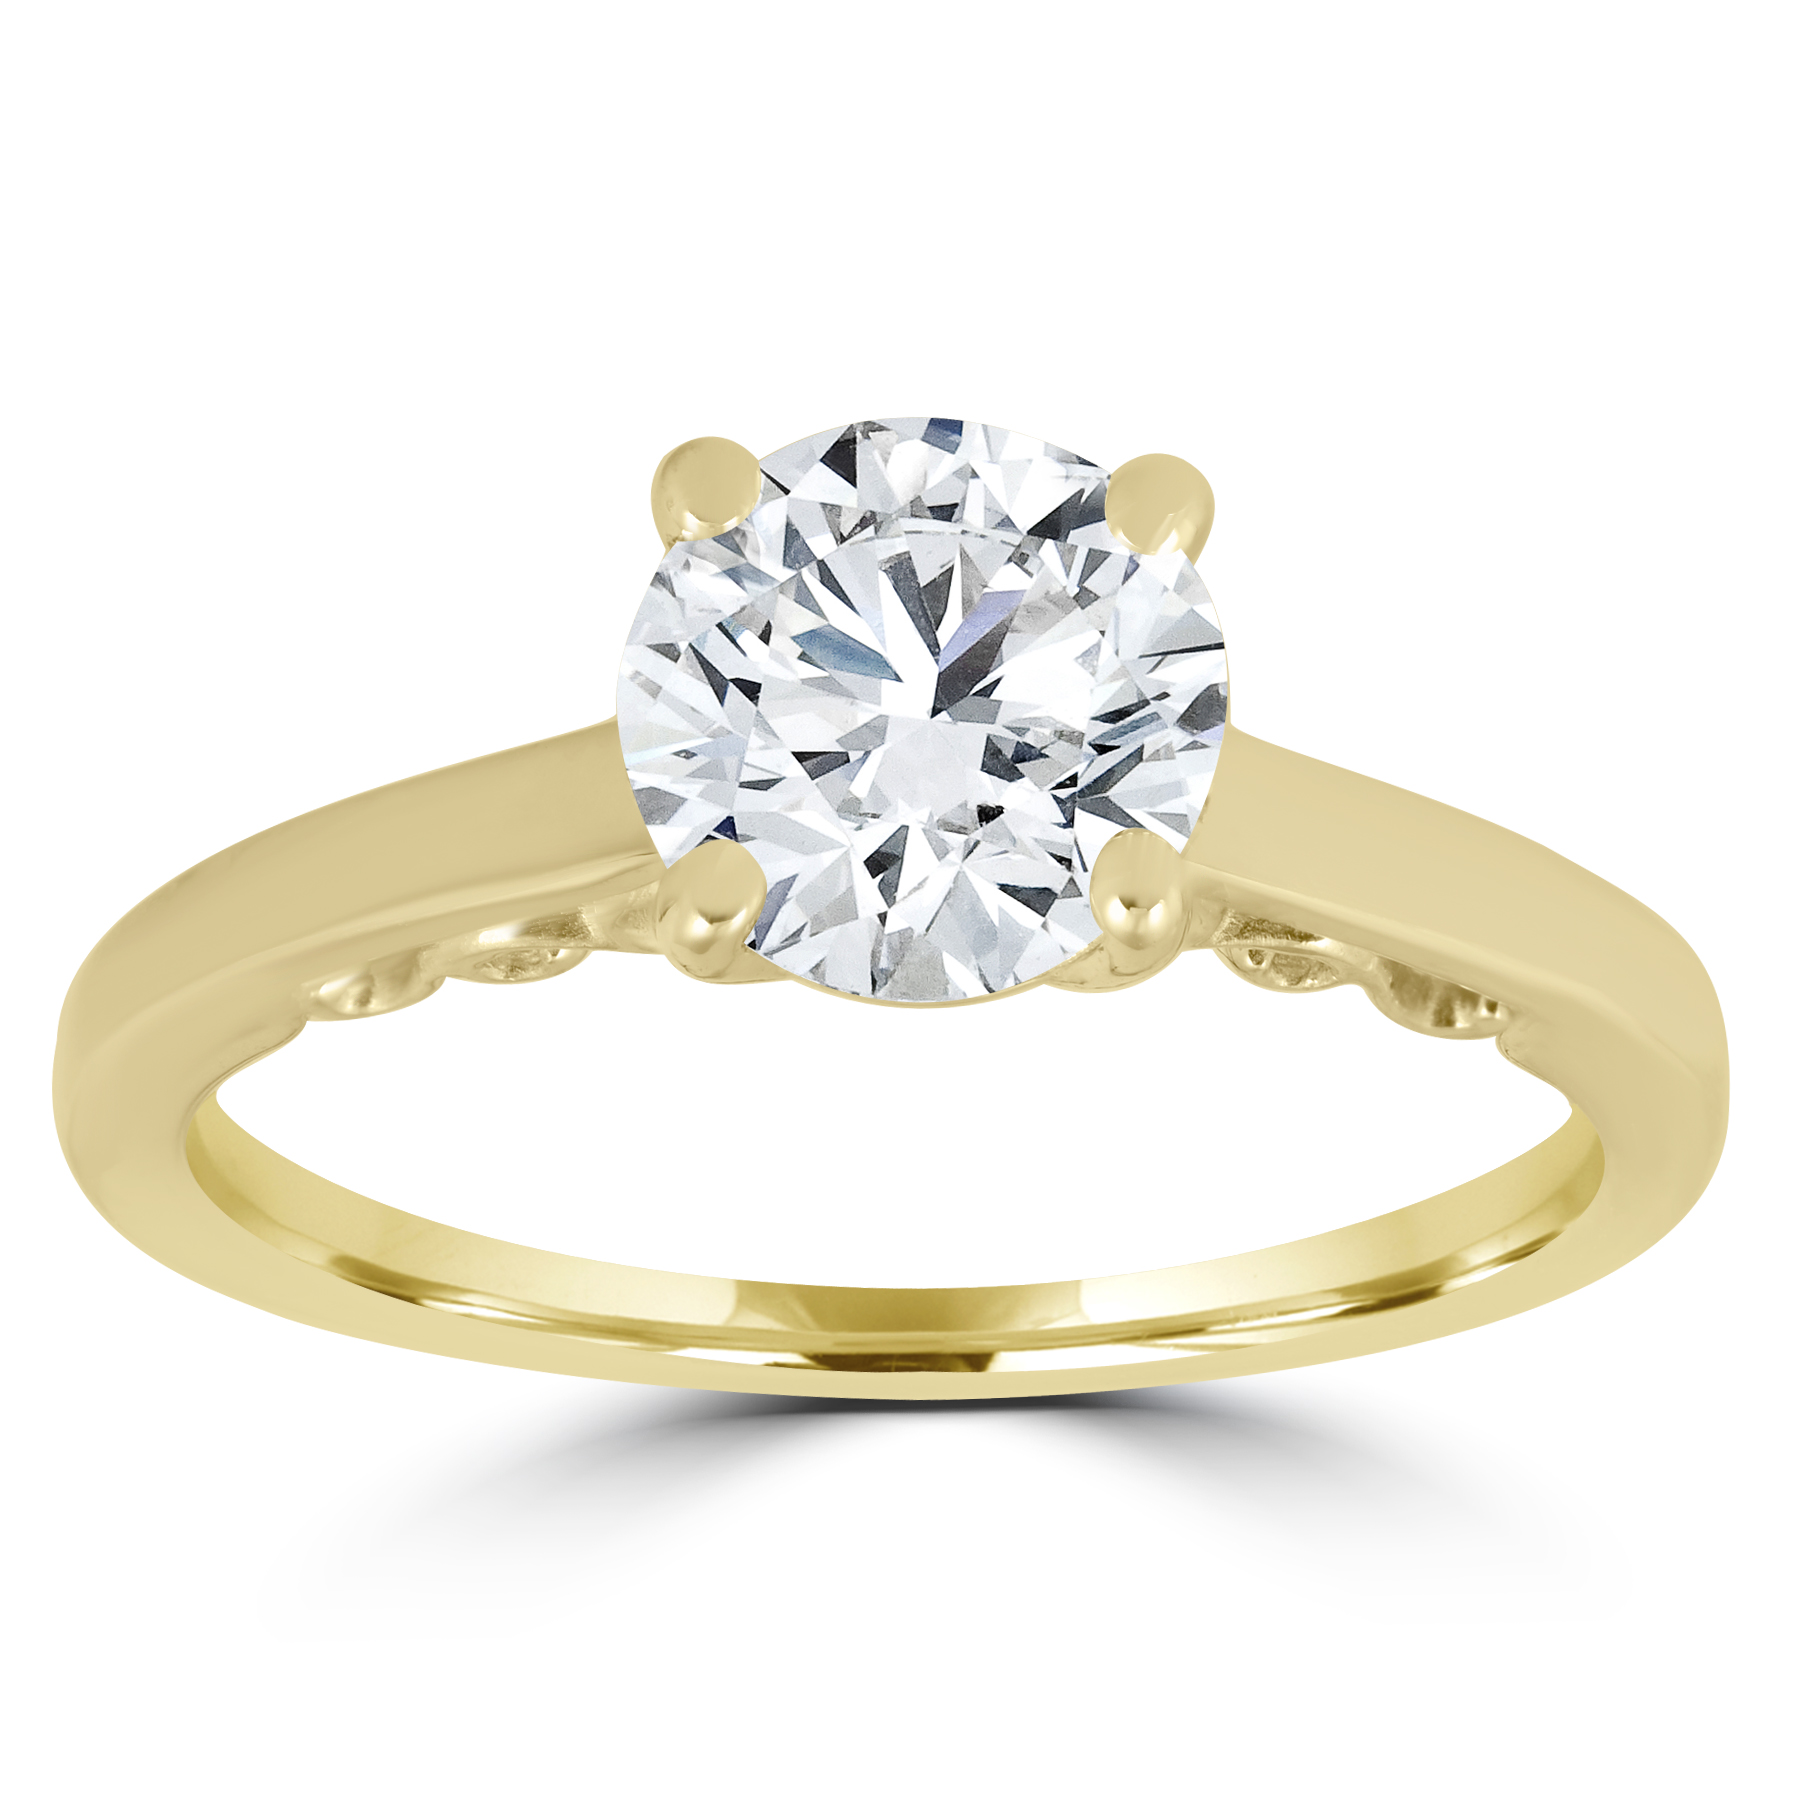 1 ct Diamond Round Brilliant Solitaire Engagement Ring 14k Yellow Gold